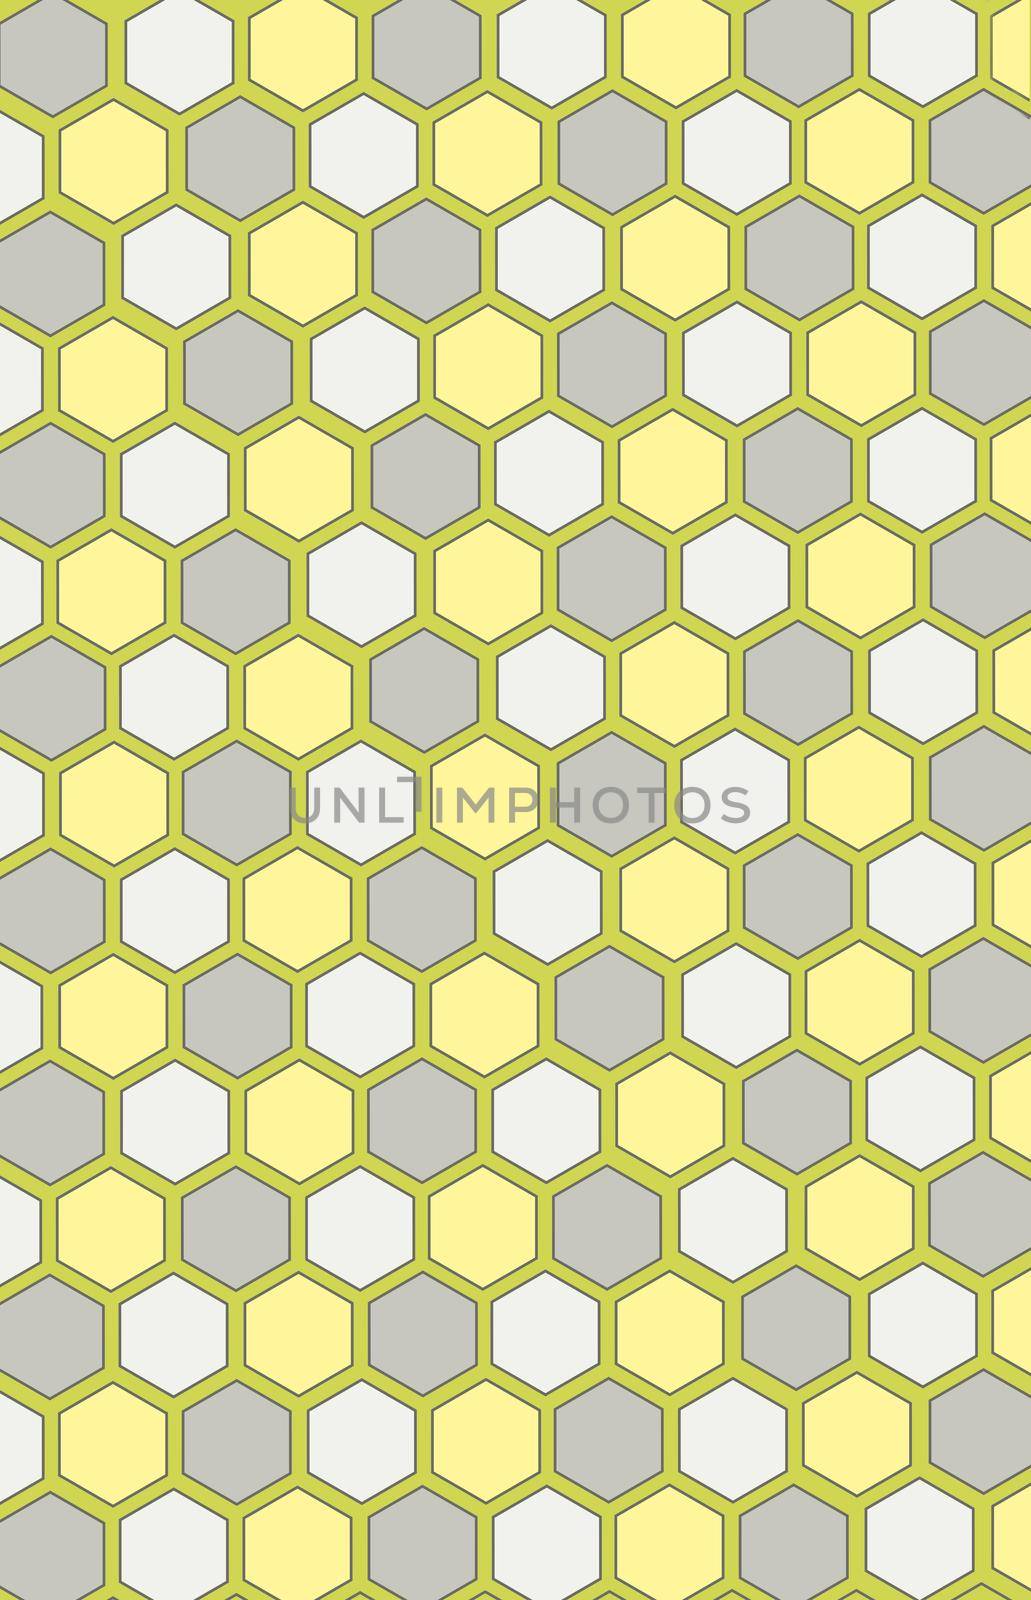 Honeycomb seamless pattern. Illustration. Colors: gray yellow and white